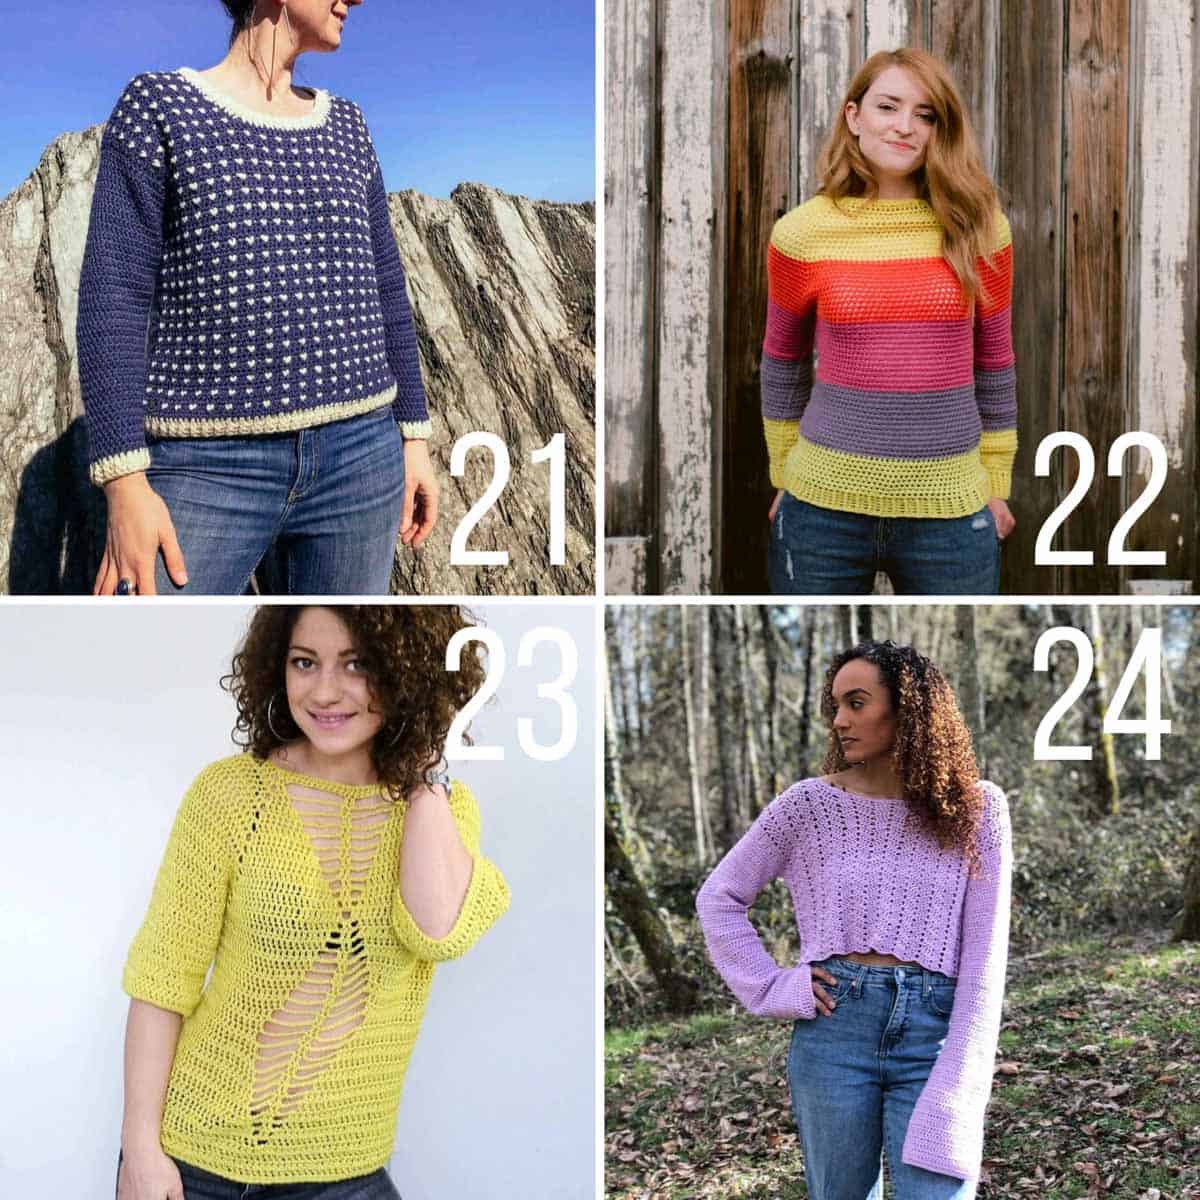 Four colorful crochet sweater patterns that are perfect for the warmer weather of spring and summer.